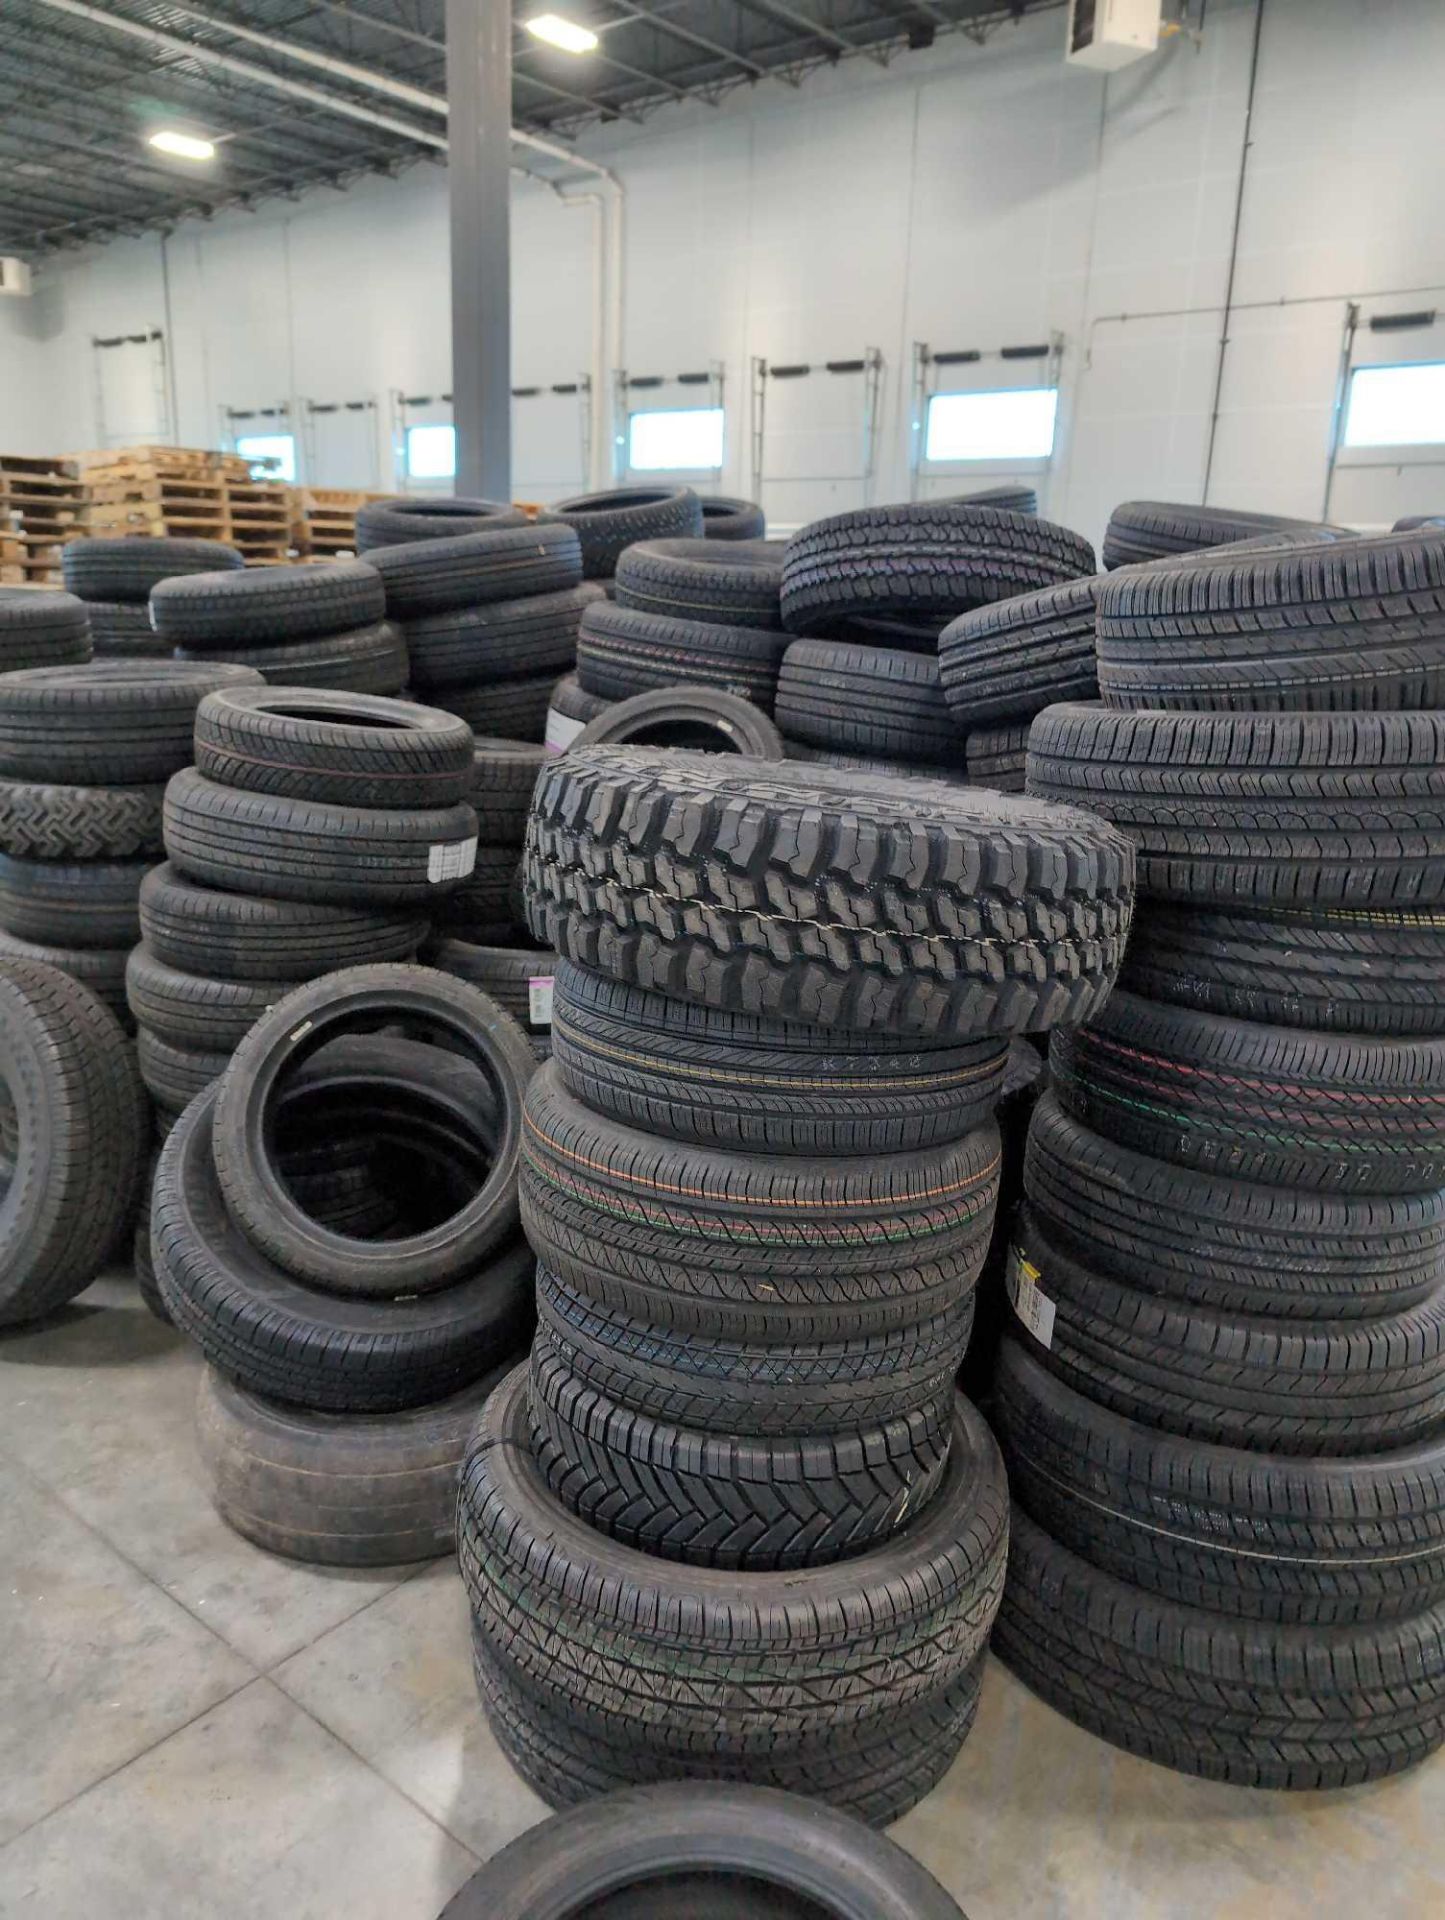 Approx 300 Tires - Image 43 of 48